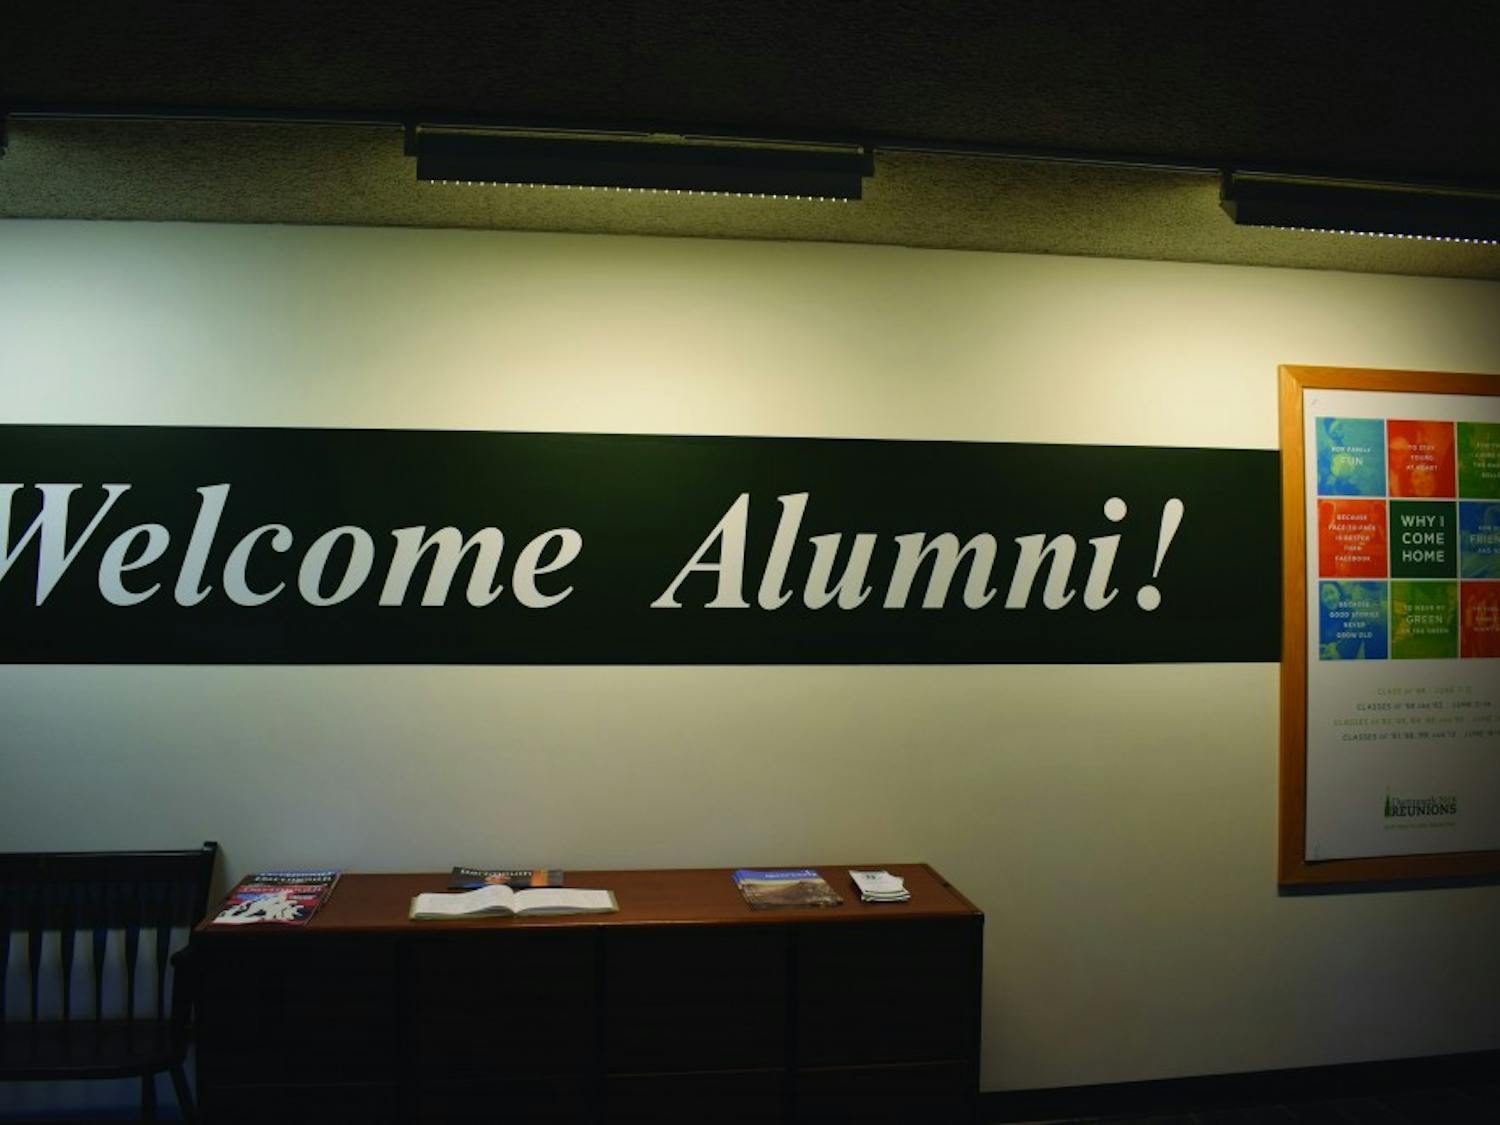 If they haven’t already, members of the Class of 2018 may soon become very familiar with the Blunt Alumni Center.